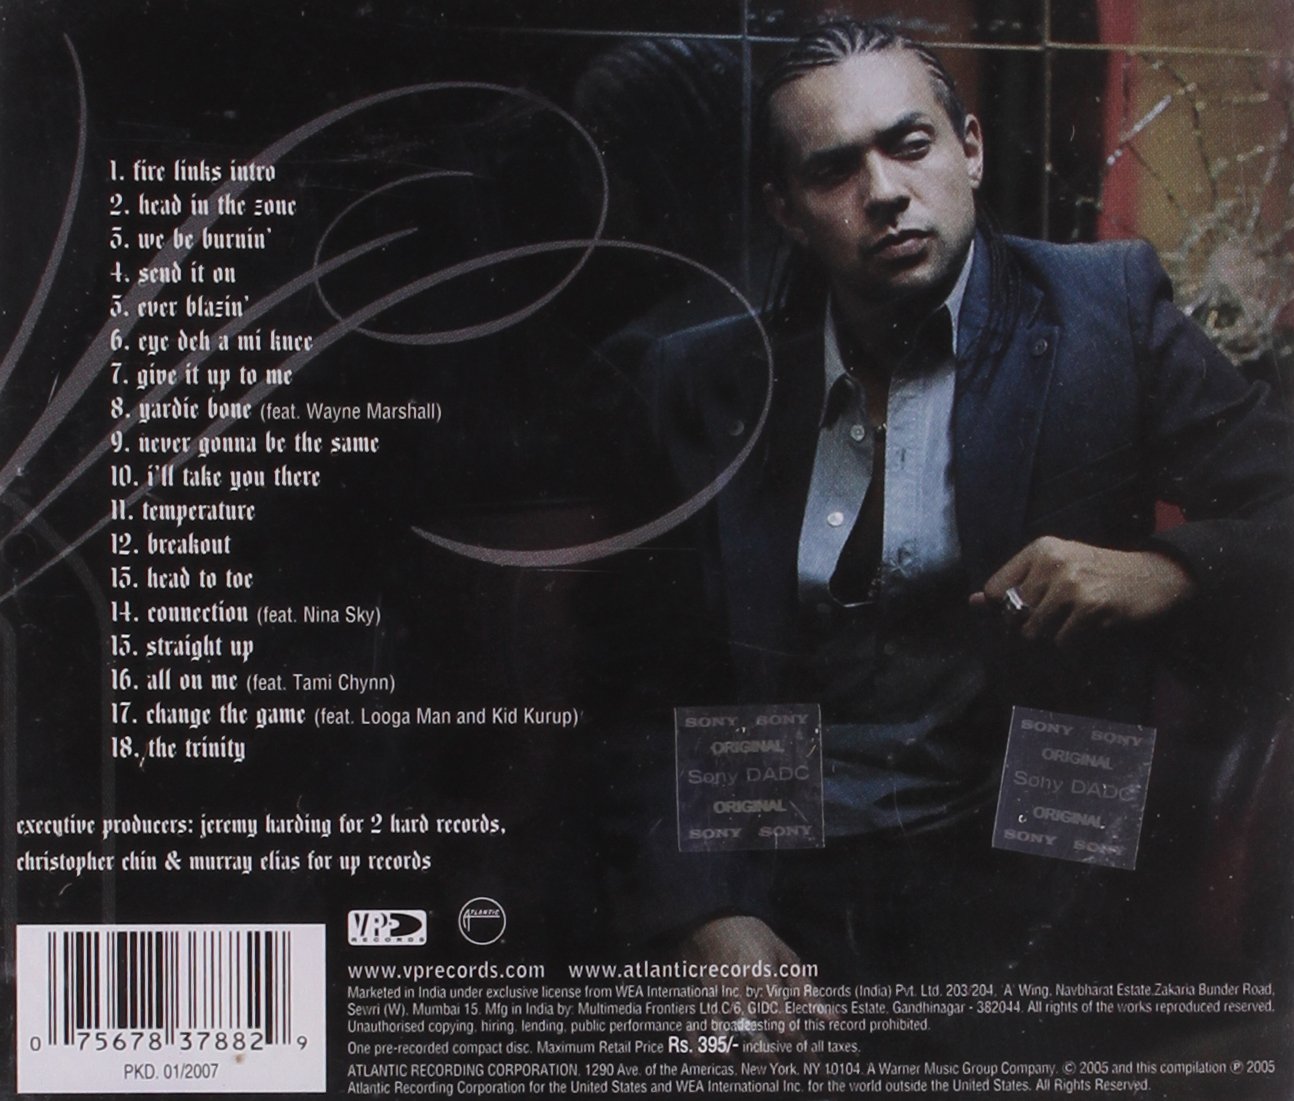 sean paul other side of love mp3 download 320kbps